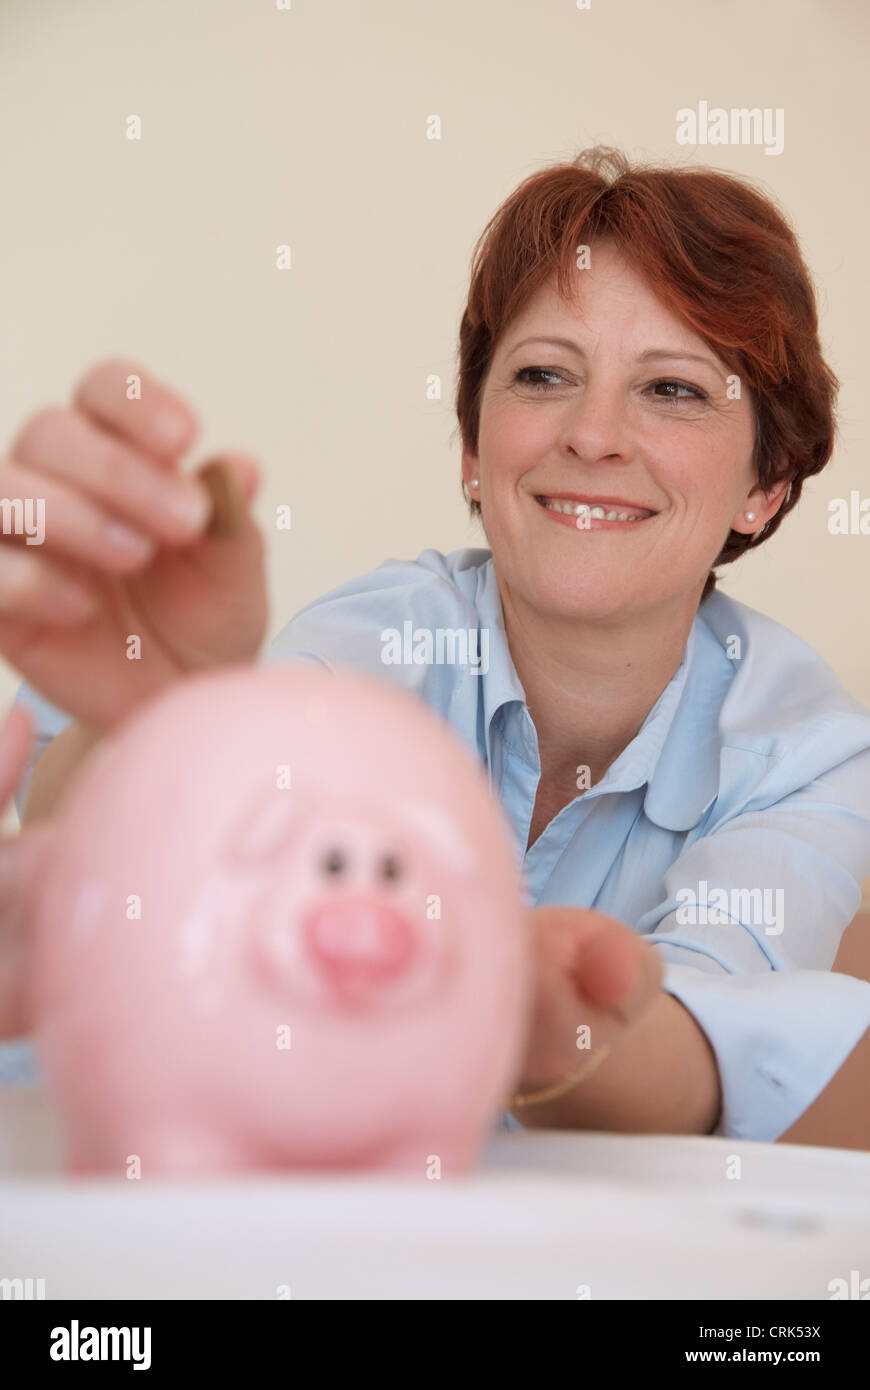 Woman putting money in piggy bank Stock Photo